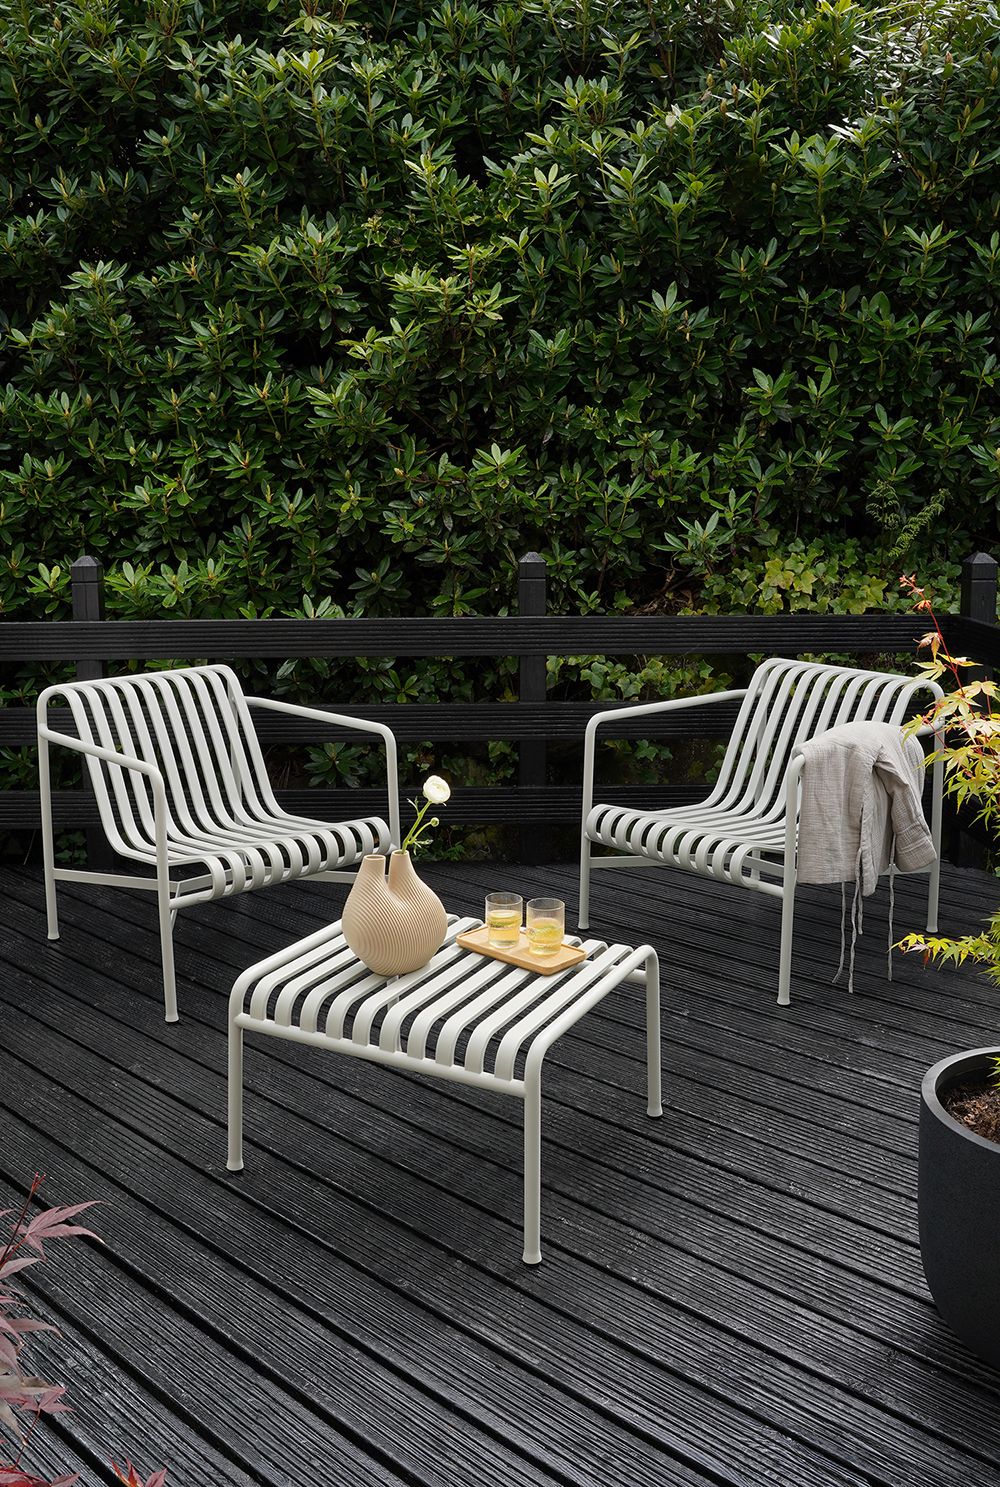 Contemporary and Stylish Garden Furniture for Your Outdoor Space